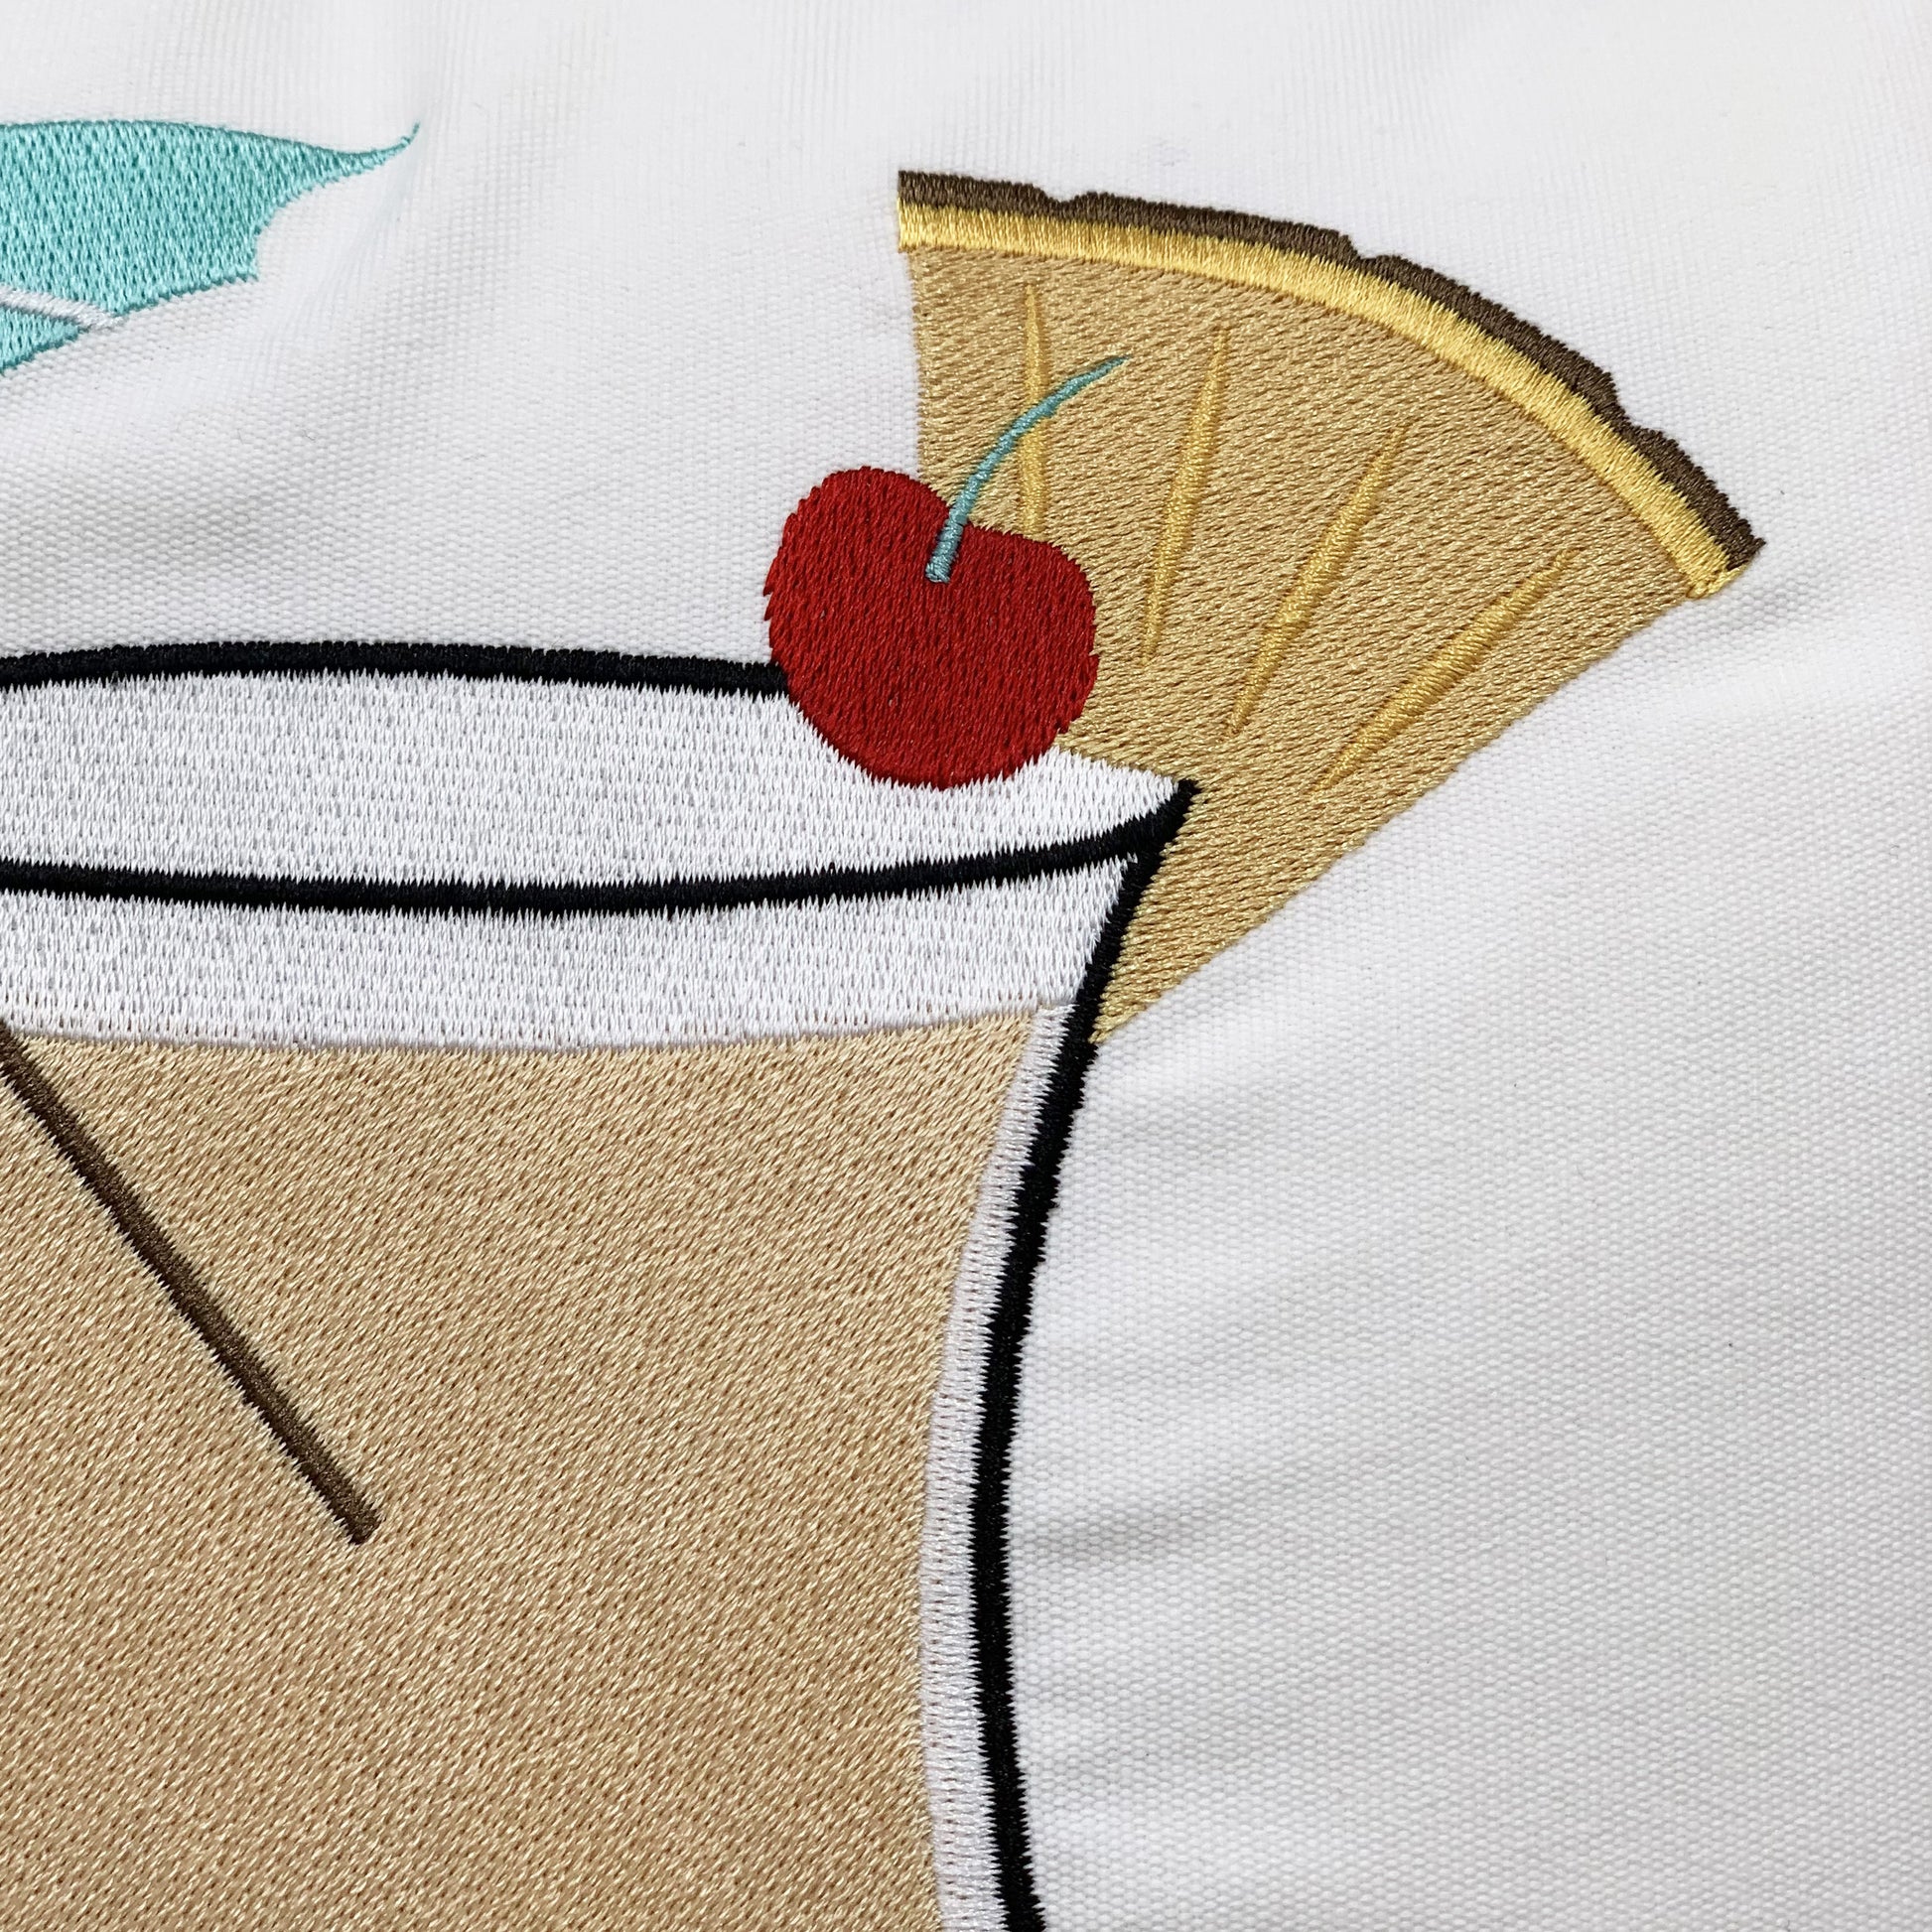 Detailed shot of the Pina Colada Indoor Outdoor Pillow's embroidery work.